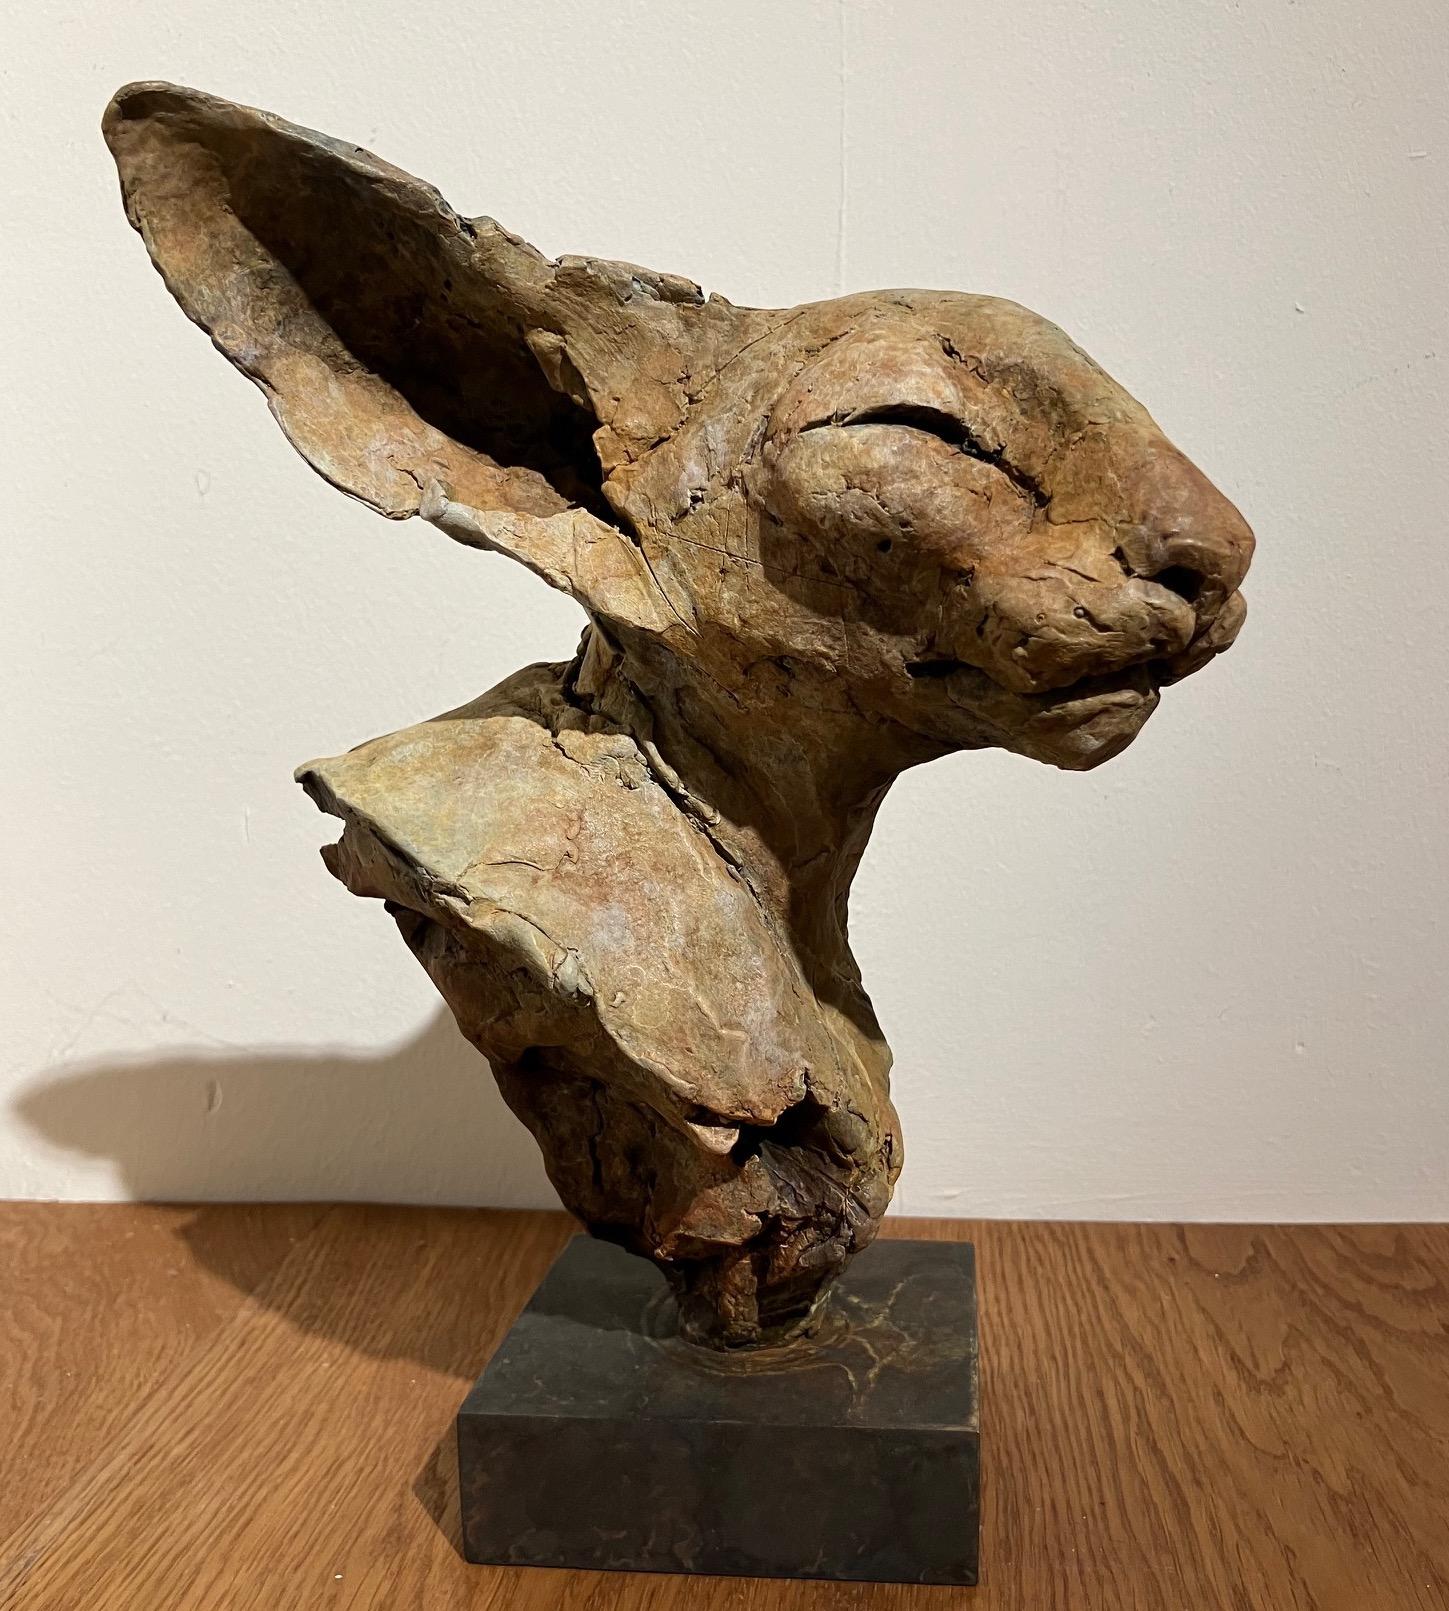 Nichola Theakston (1967) has established herself as one of the UK’s foremost contemporary sculptors working within the animal genre. 

With the ''Bastet Study 4'' Nichola shows how exquisite she can capture the feelings and expressions in an animal.